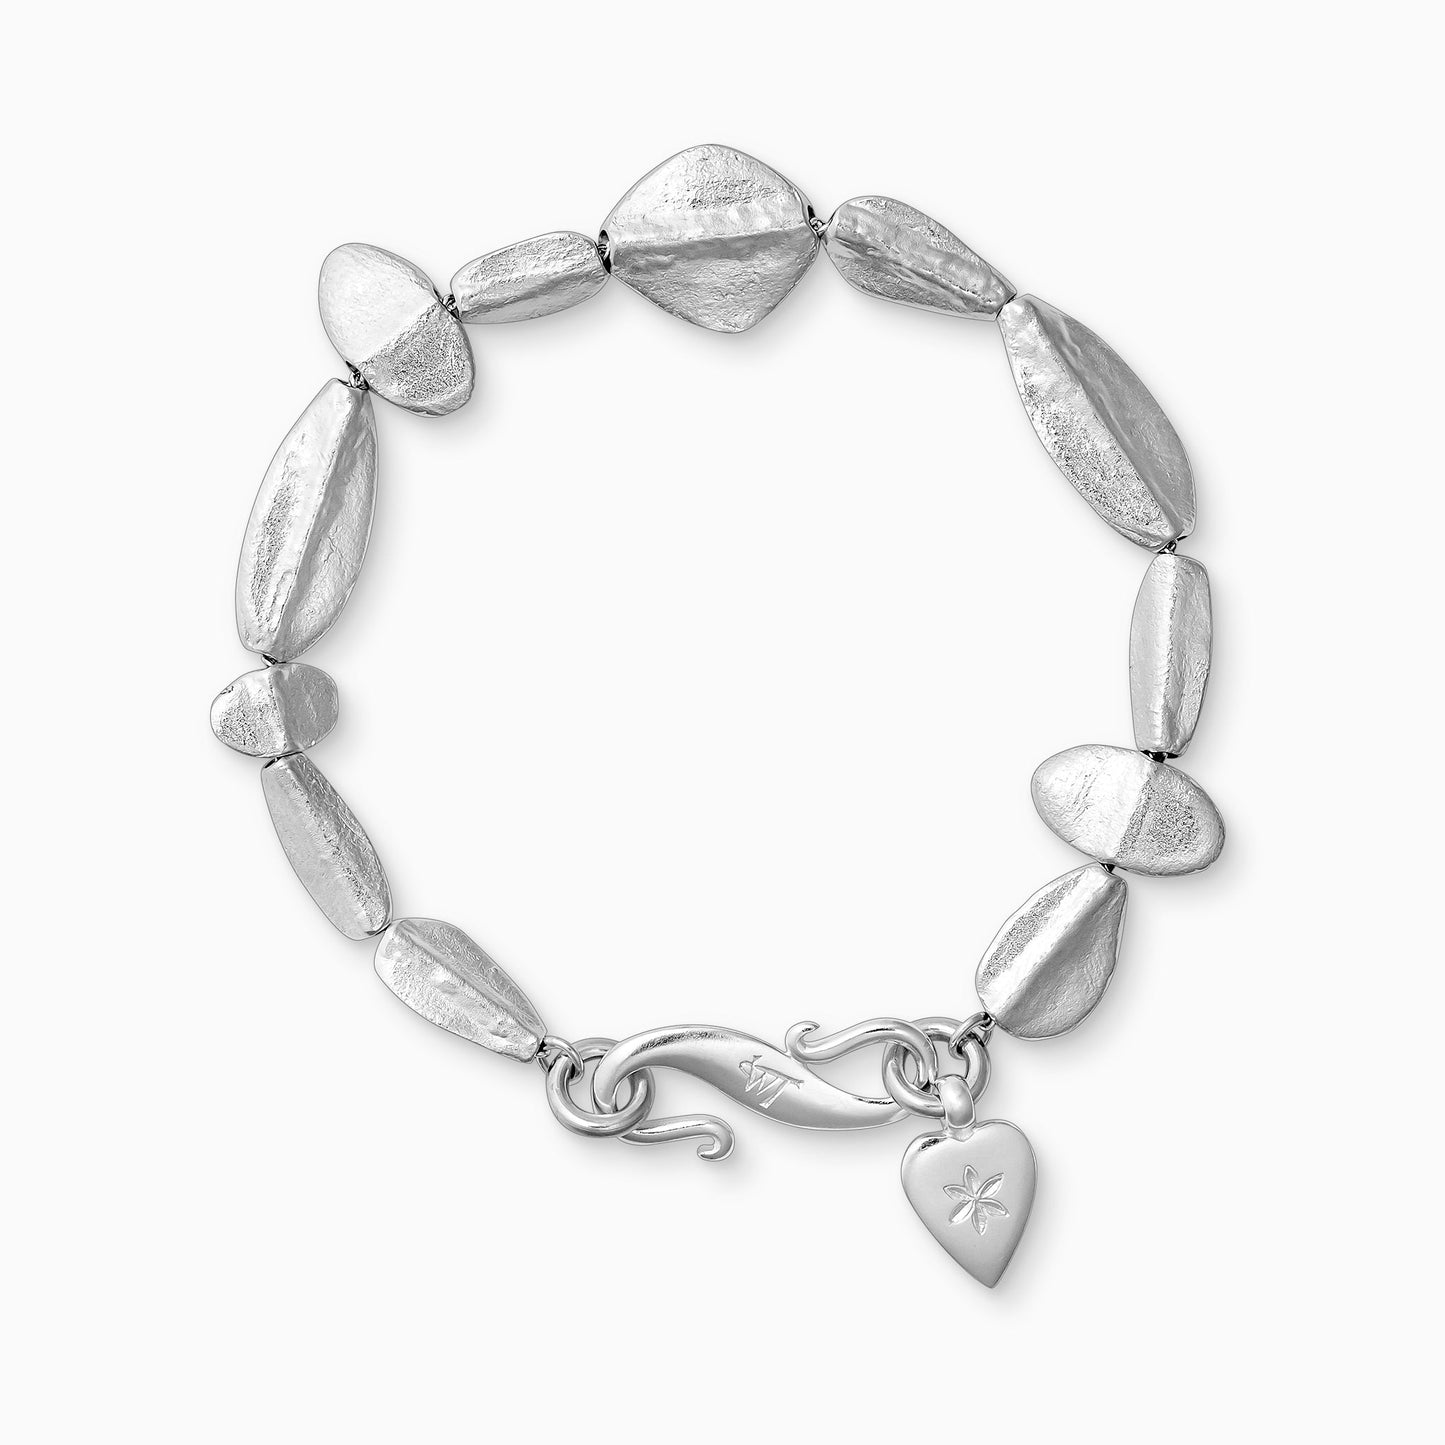 A recycled Silver bracelet of handmade textured beads with a central ridge.  Finished with a smooth heart shaped charm engraved with a 6 petal flower and our signature ’S’ clasp.Bracelet length 190mm. Beads varying sizes from 11mm x 6mm to 35mm x 15mm.